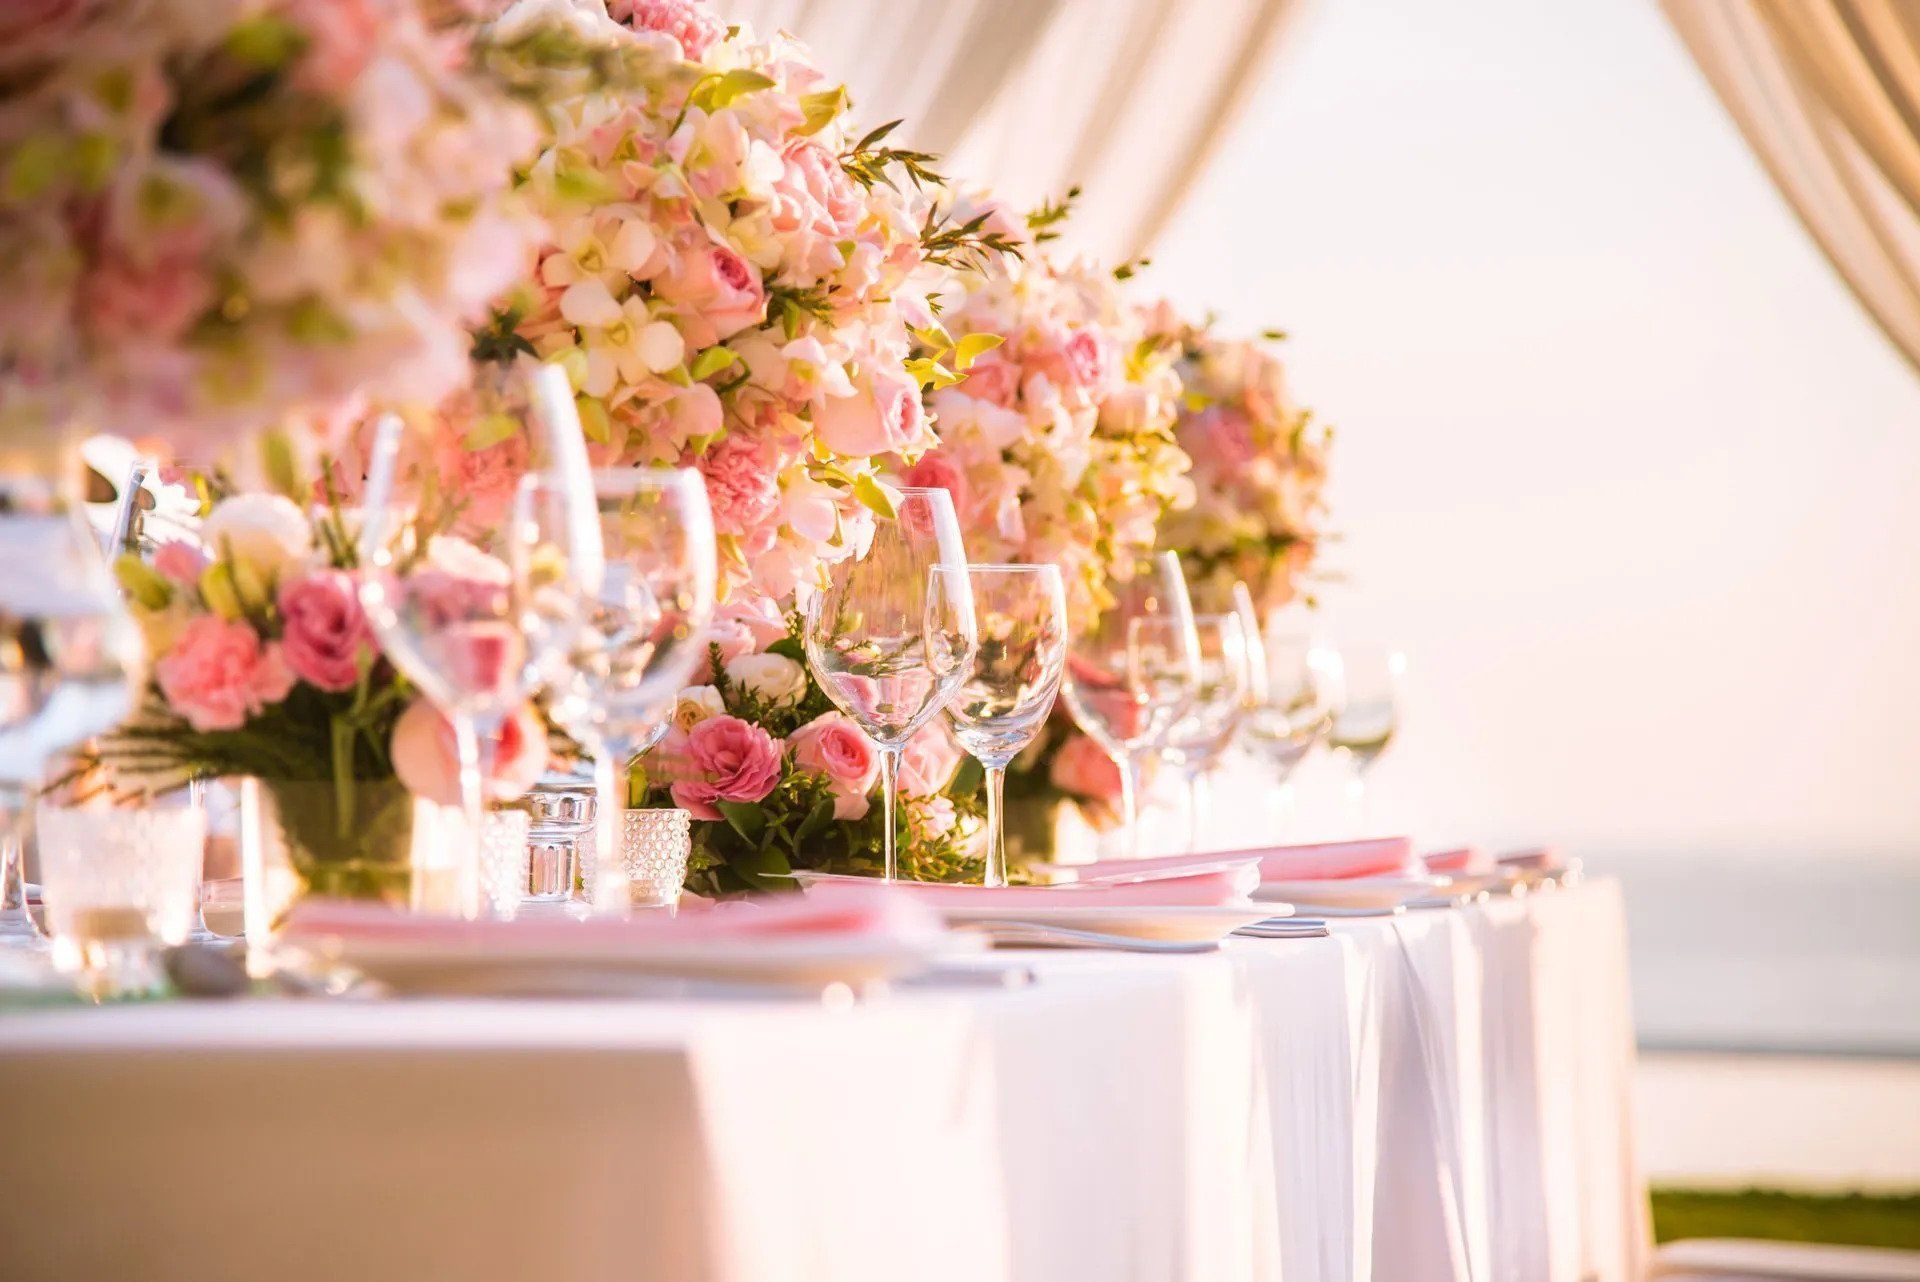 A long table set for a wedding reception with pink flowers and wine glasses.